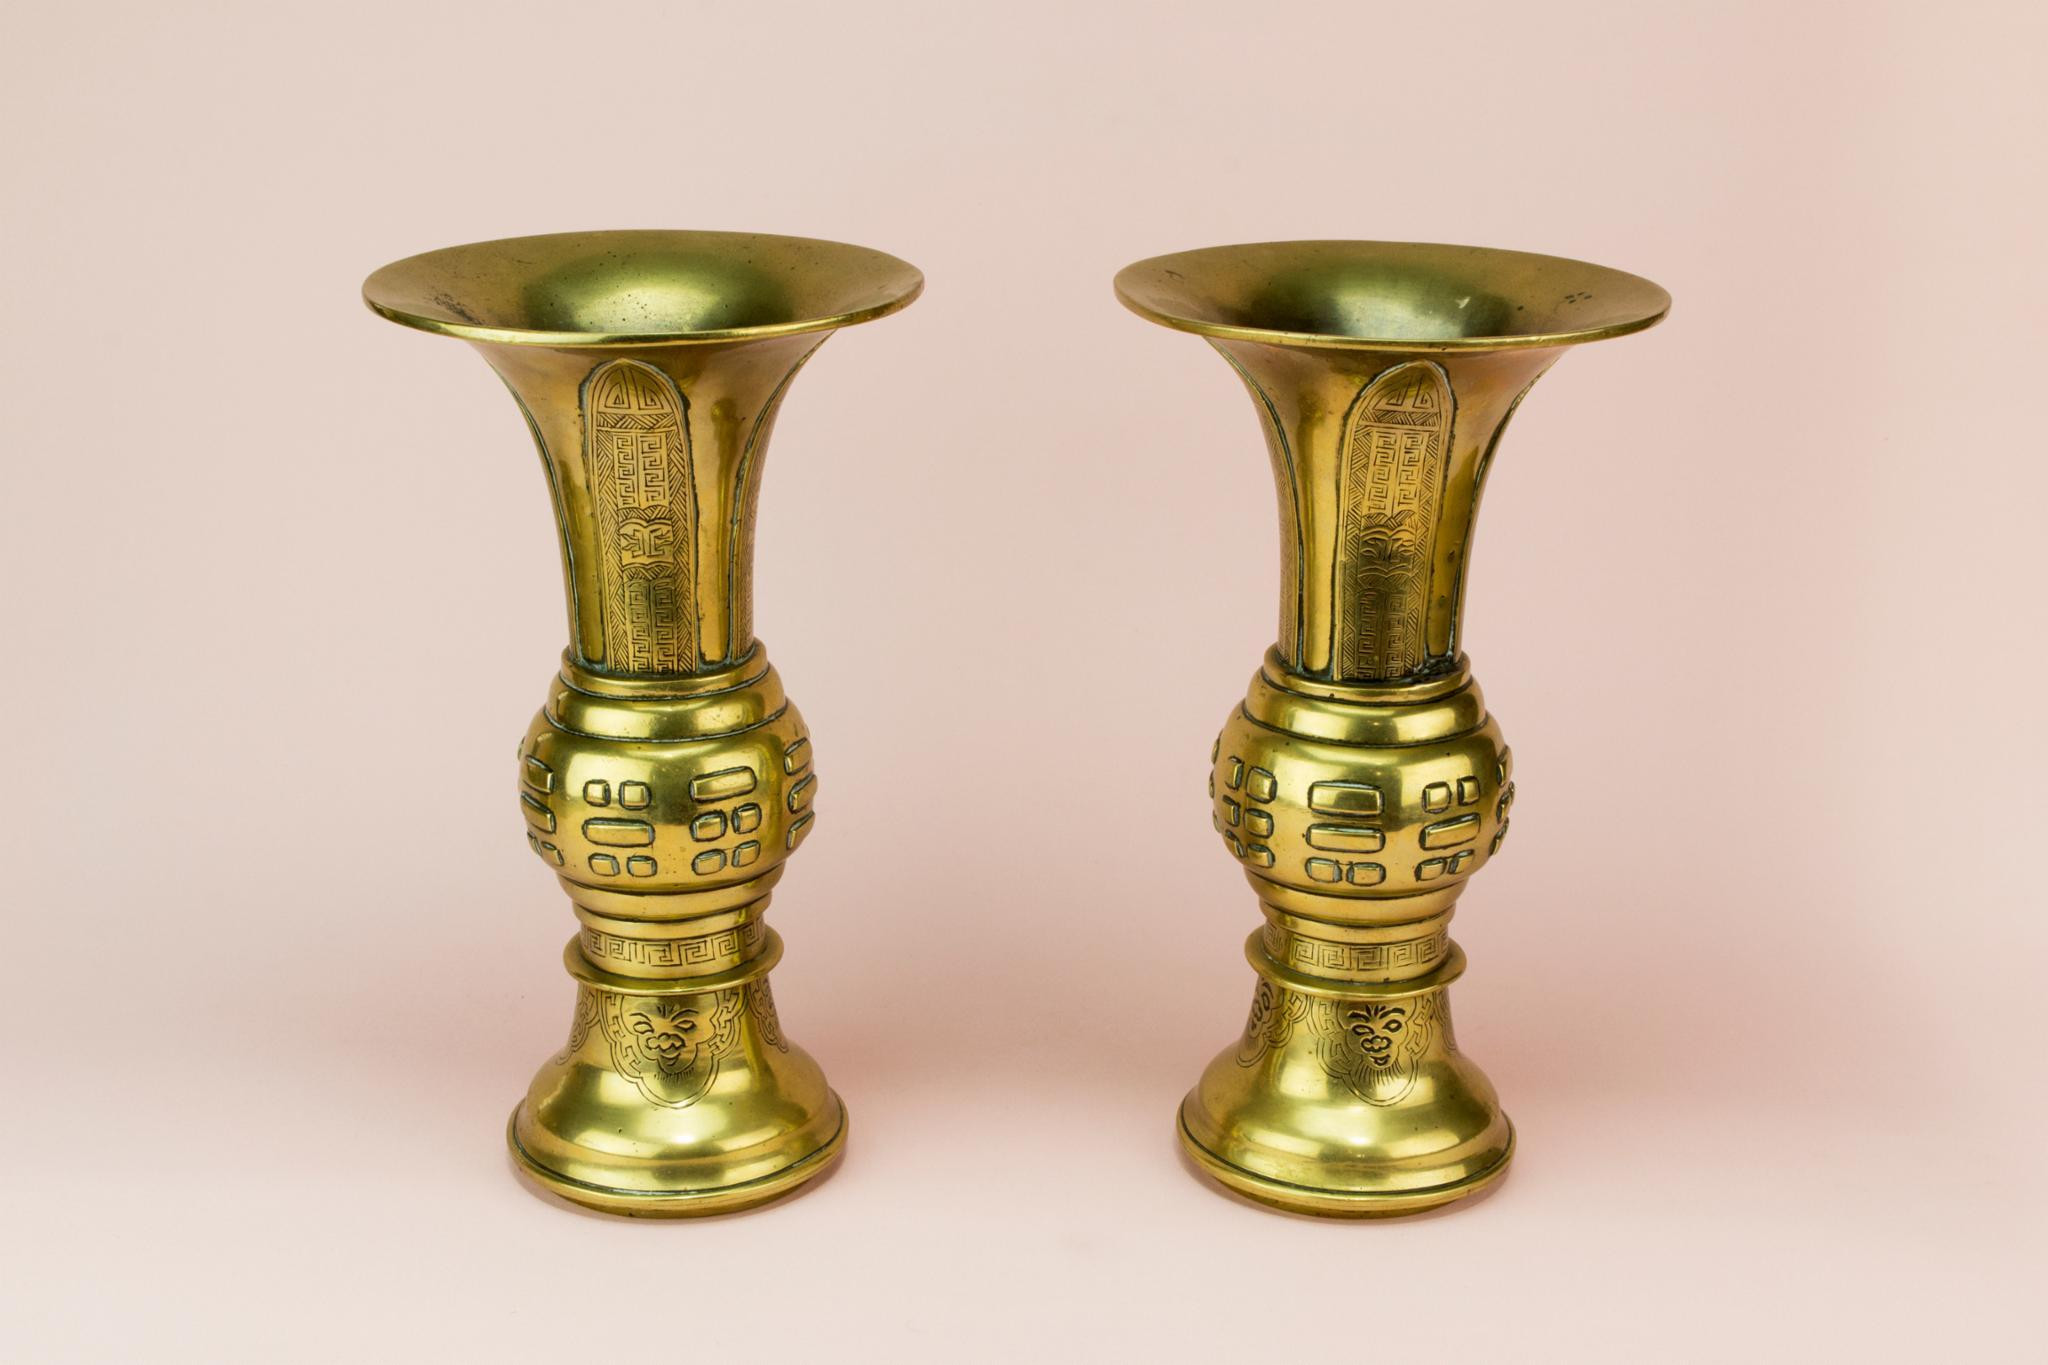 small silver bud vases of 2 gu shaped brass vases chinese 19th century late 19th century within 2 gu shaped brass vases chinese 19th century